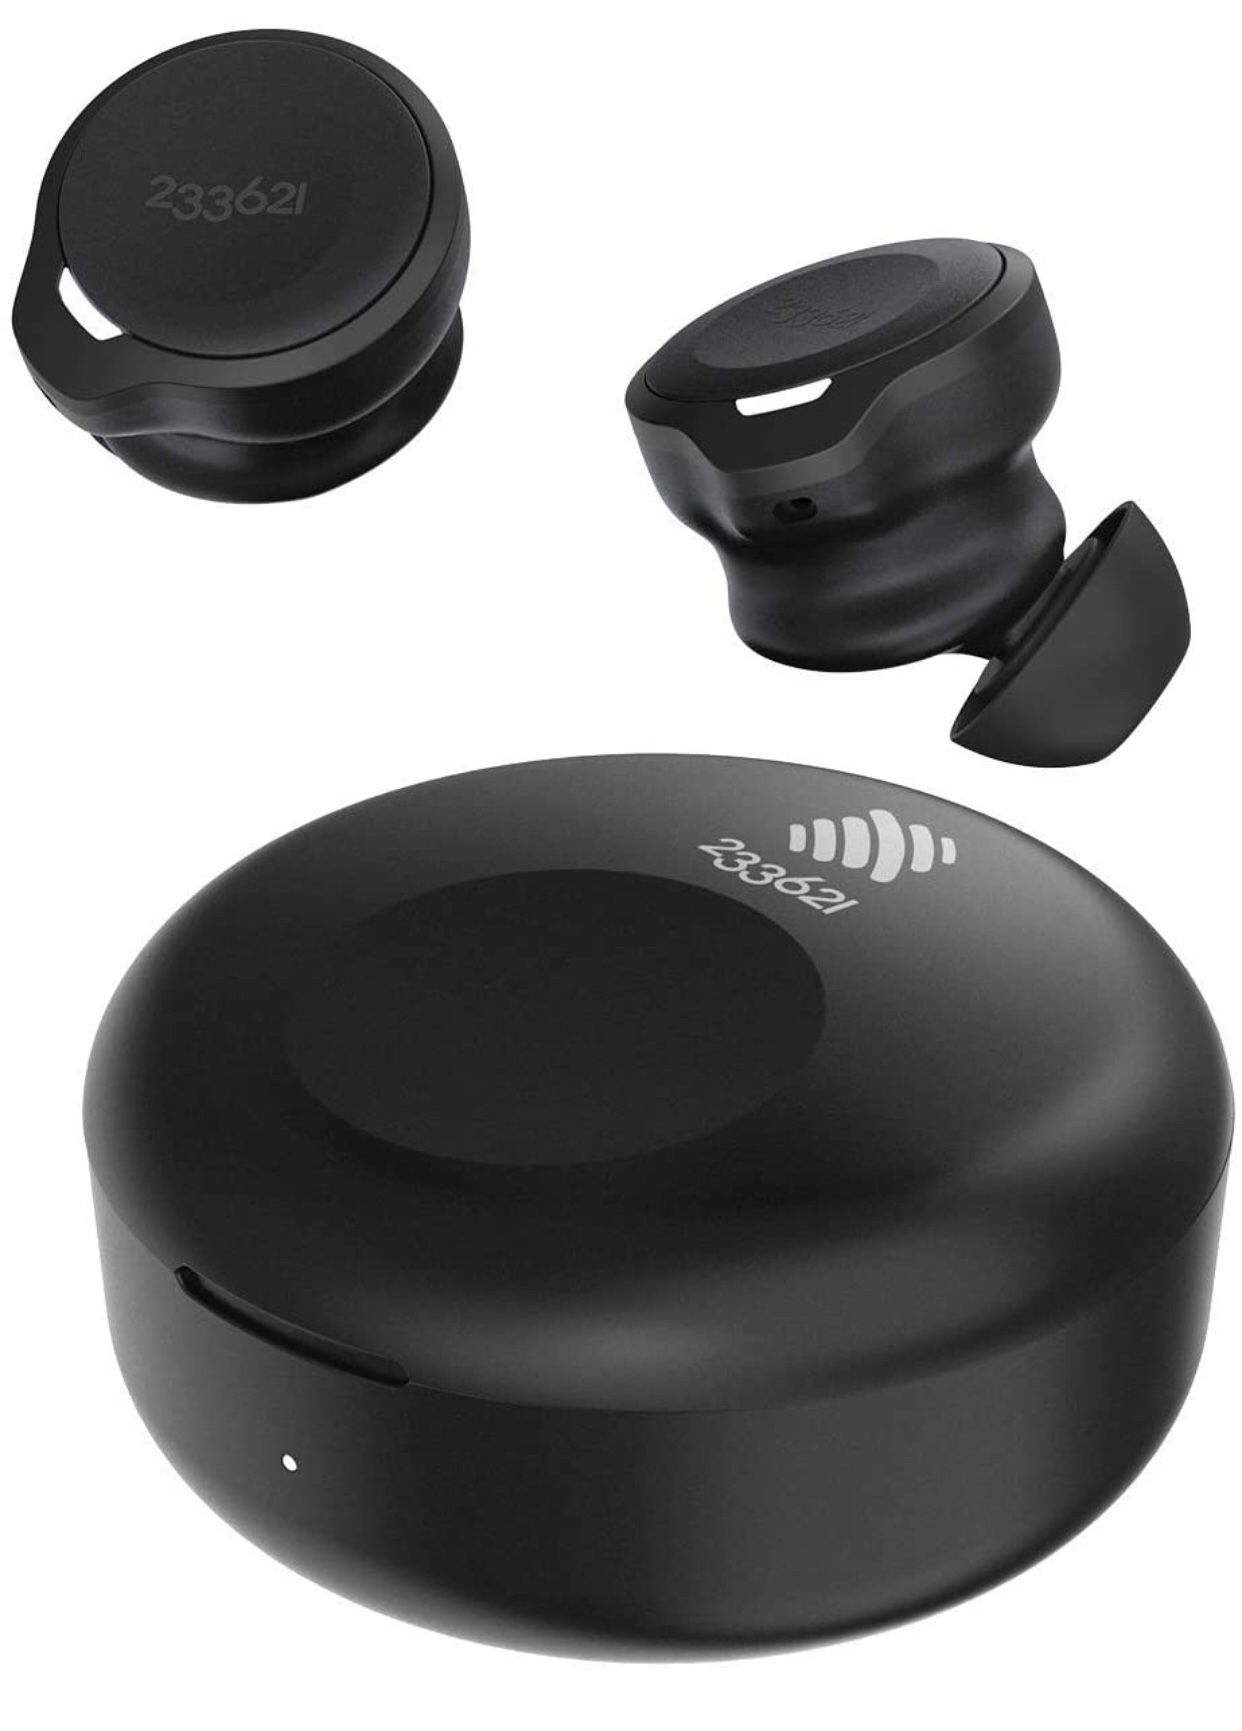 True Wireless Bluetooth Earbuds Hybrid Active Noise-Canceling Headphones Touch Control with Wireless Charging Case Built-in Microphone IPX4 Waterproof